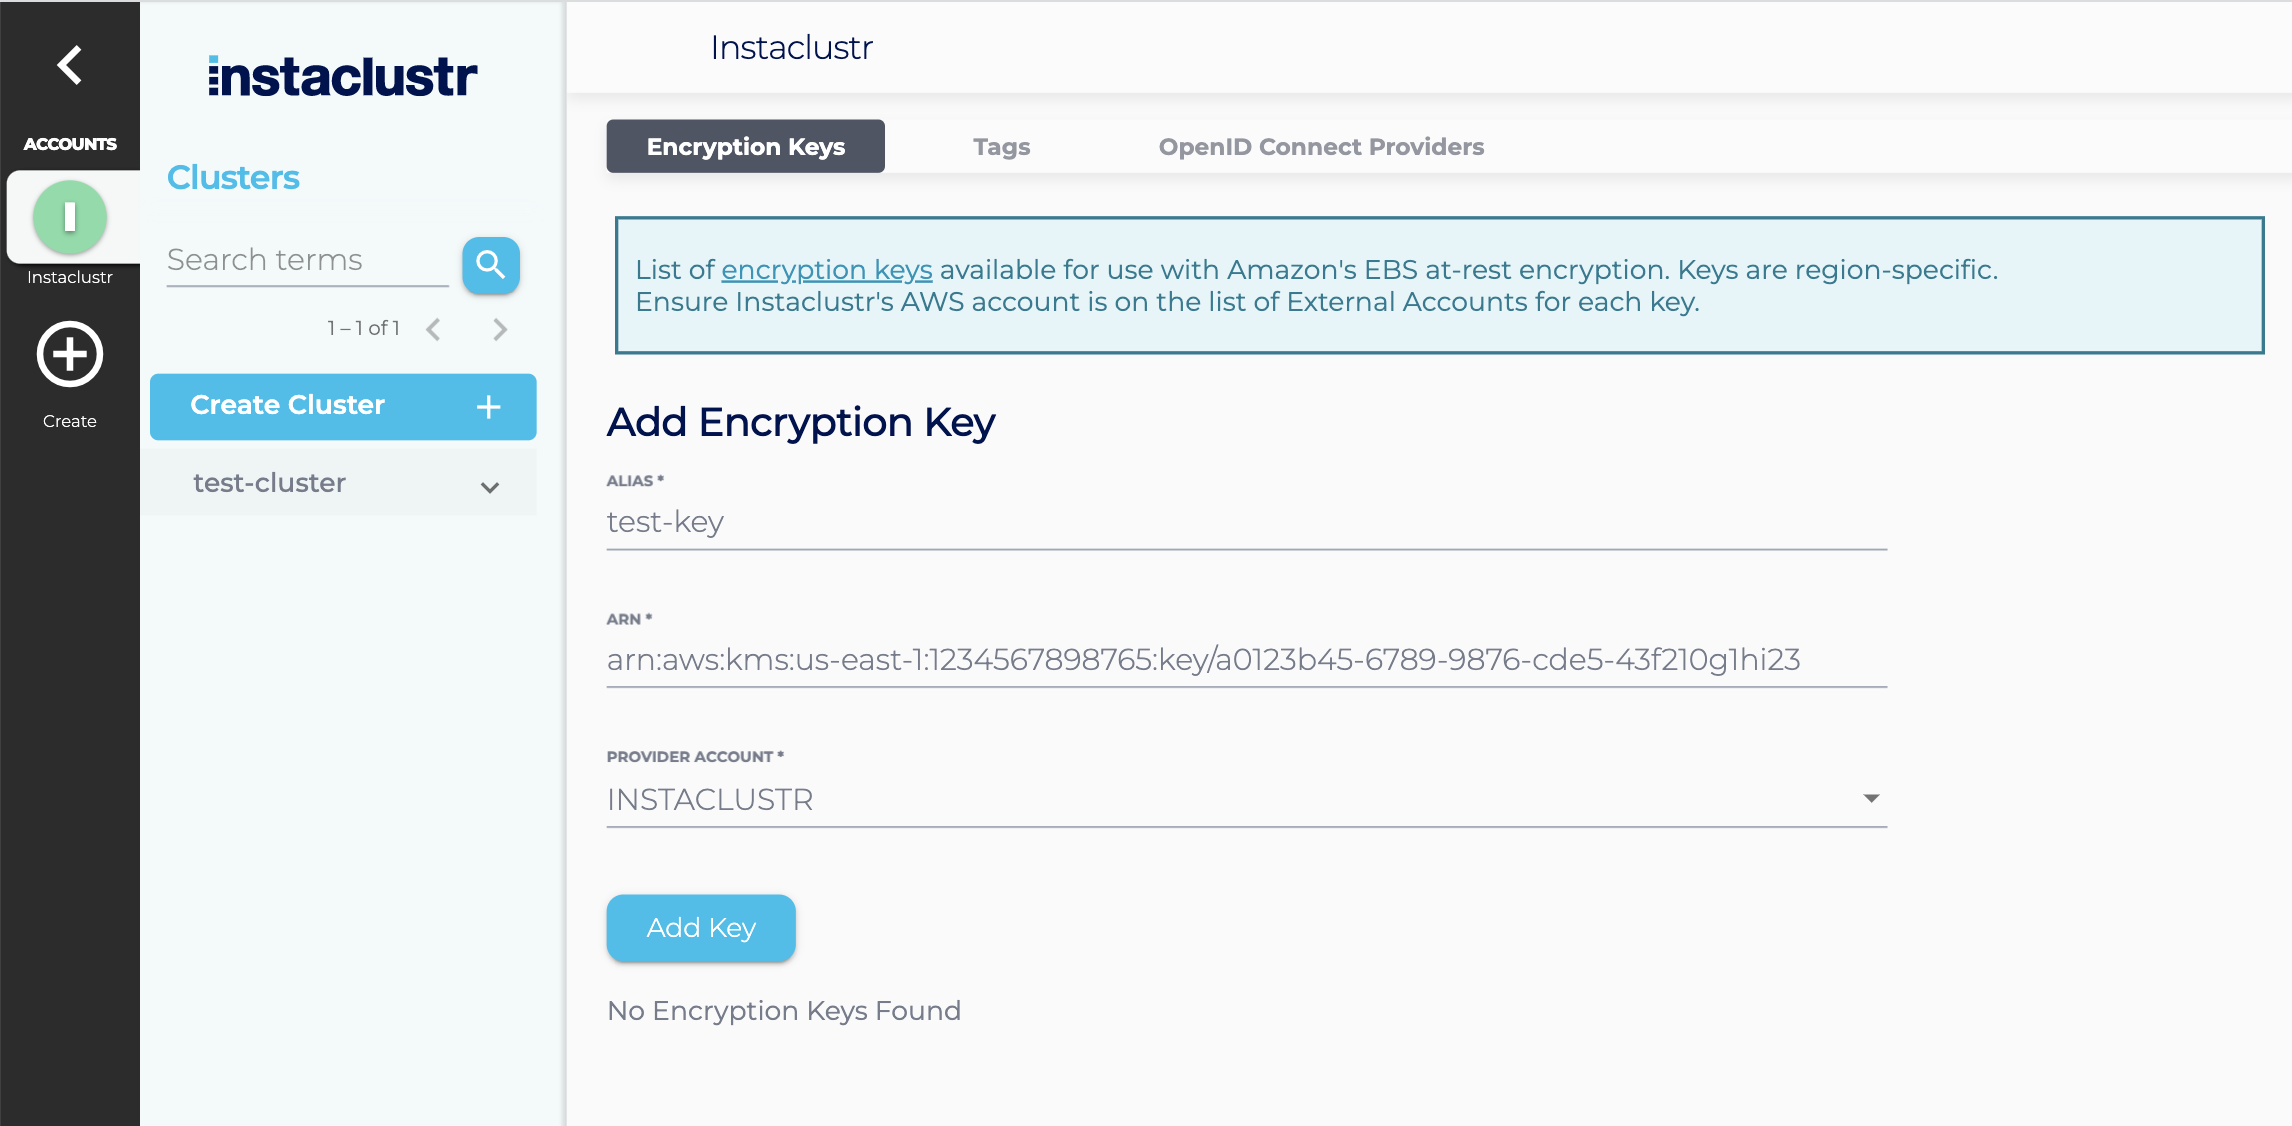 Fill the text fields to add an encryption key onto the Instaclustr console